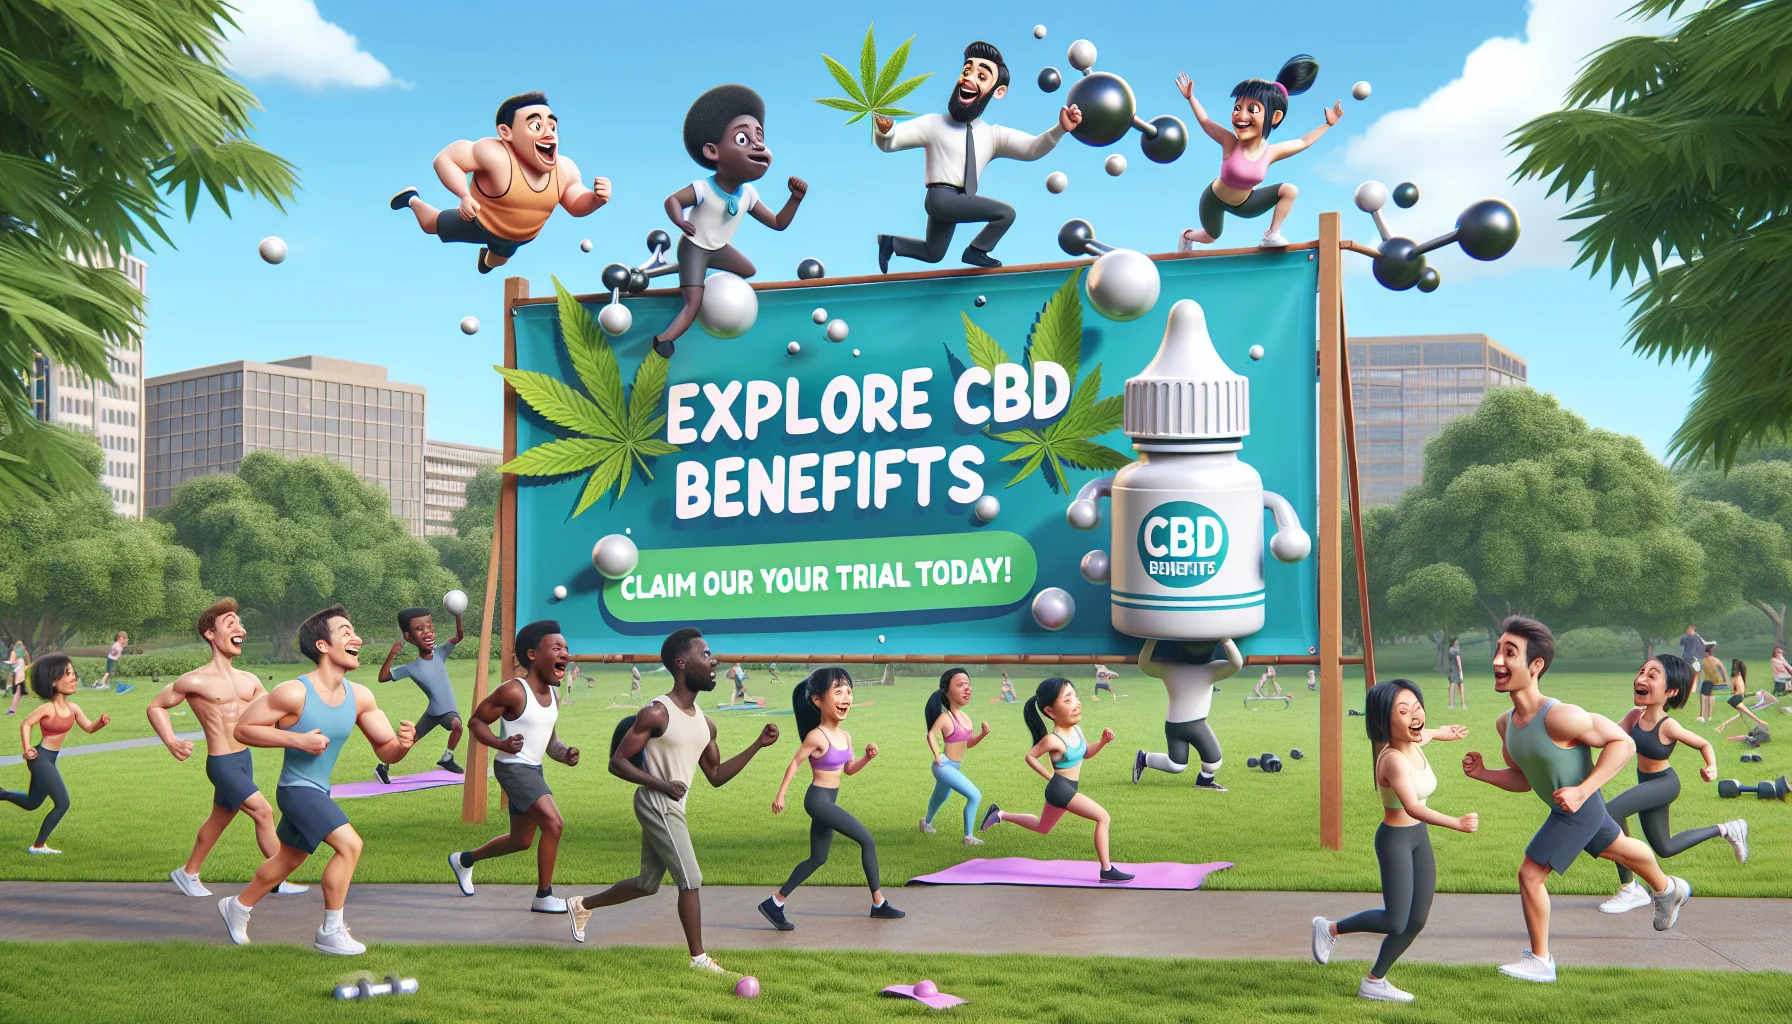 Show a humorous scenario depicting the benefits of CBD in a fitness context. Visualize a large banner with the text 'Explore CBD Benefits: Claim Your Free Trial Today!' fluttering in the background. This takes place in a lively park where a diverse group of people of different descents are engrossed in different forms of exercise. A Black male is jogging, an Asian female is doing yoga, and a Hispanic male is lifting weights. Their expressions are a mixture of hilarity, shock, and disbelief as enormous animated CBD molecules cheerfully assist and interact with them during their workout.